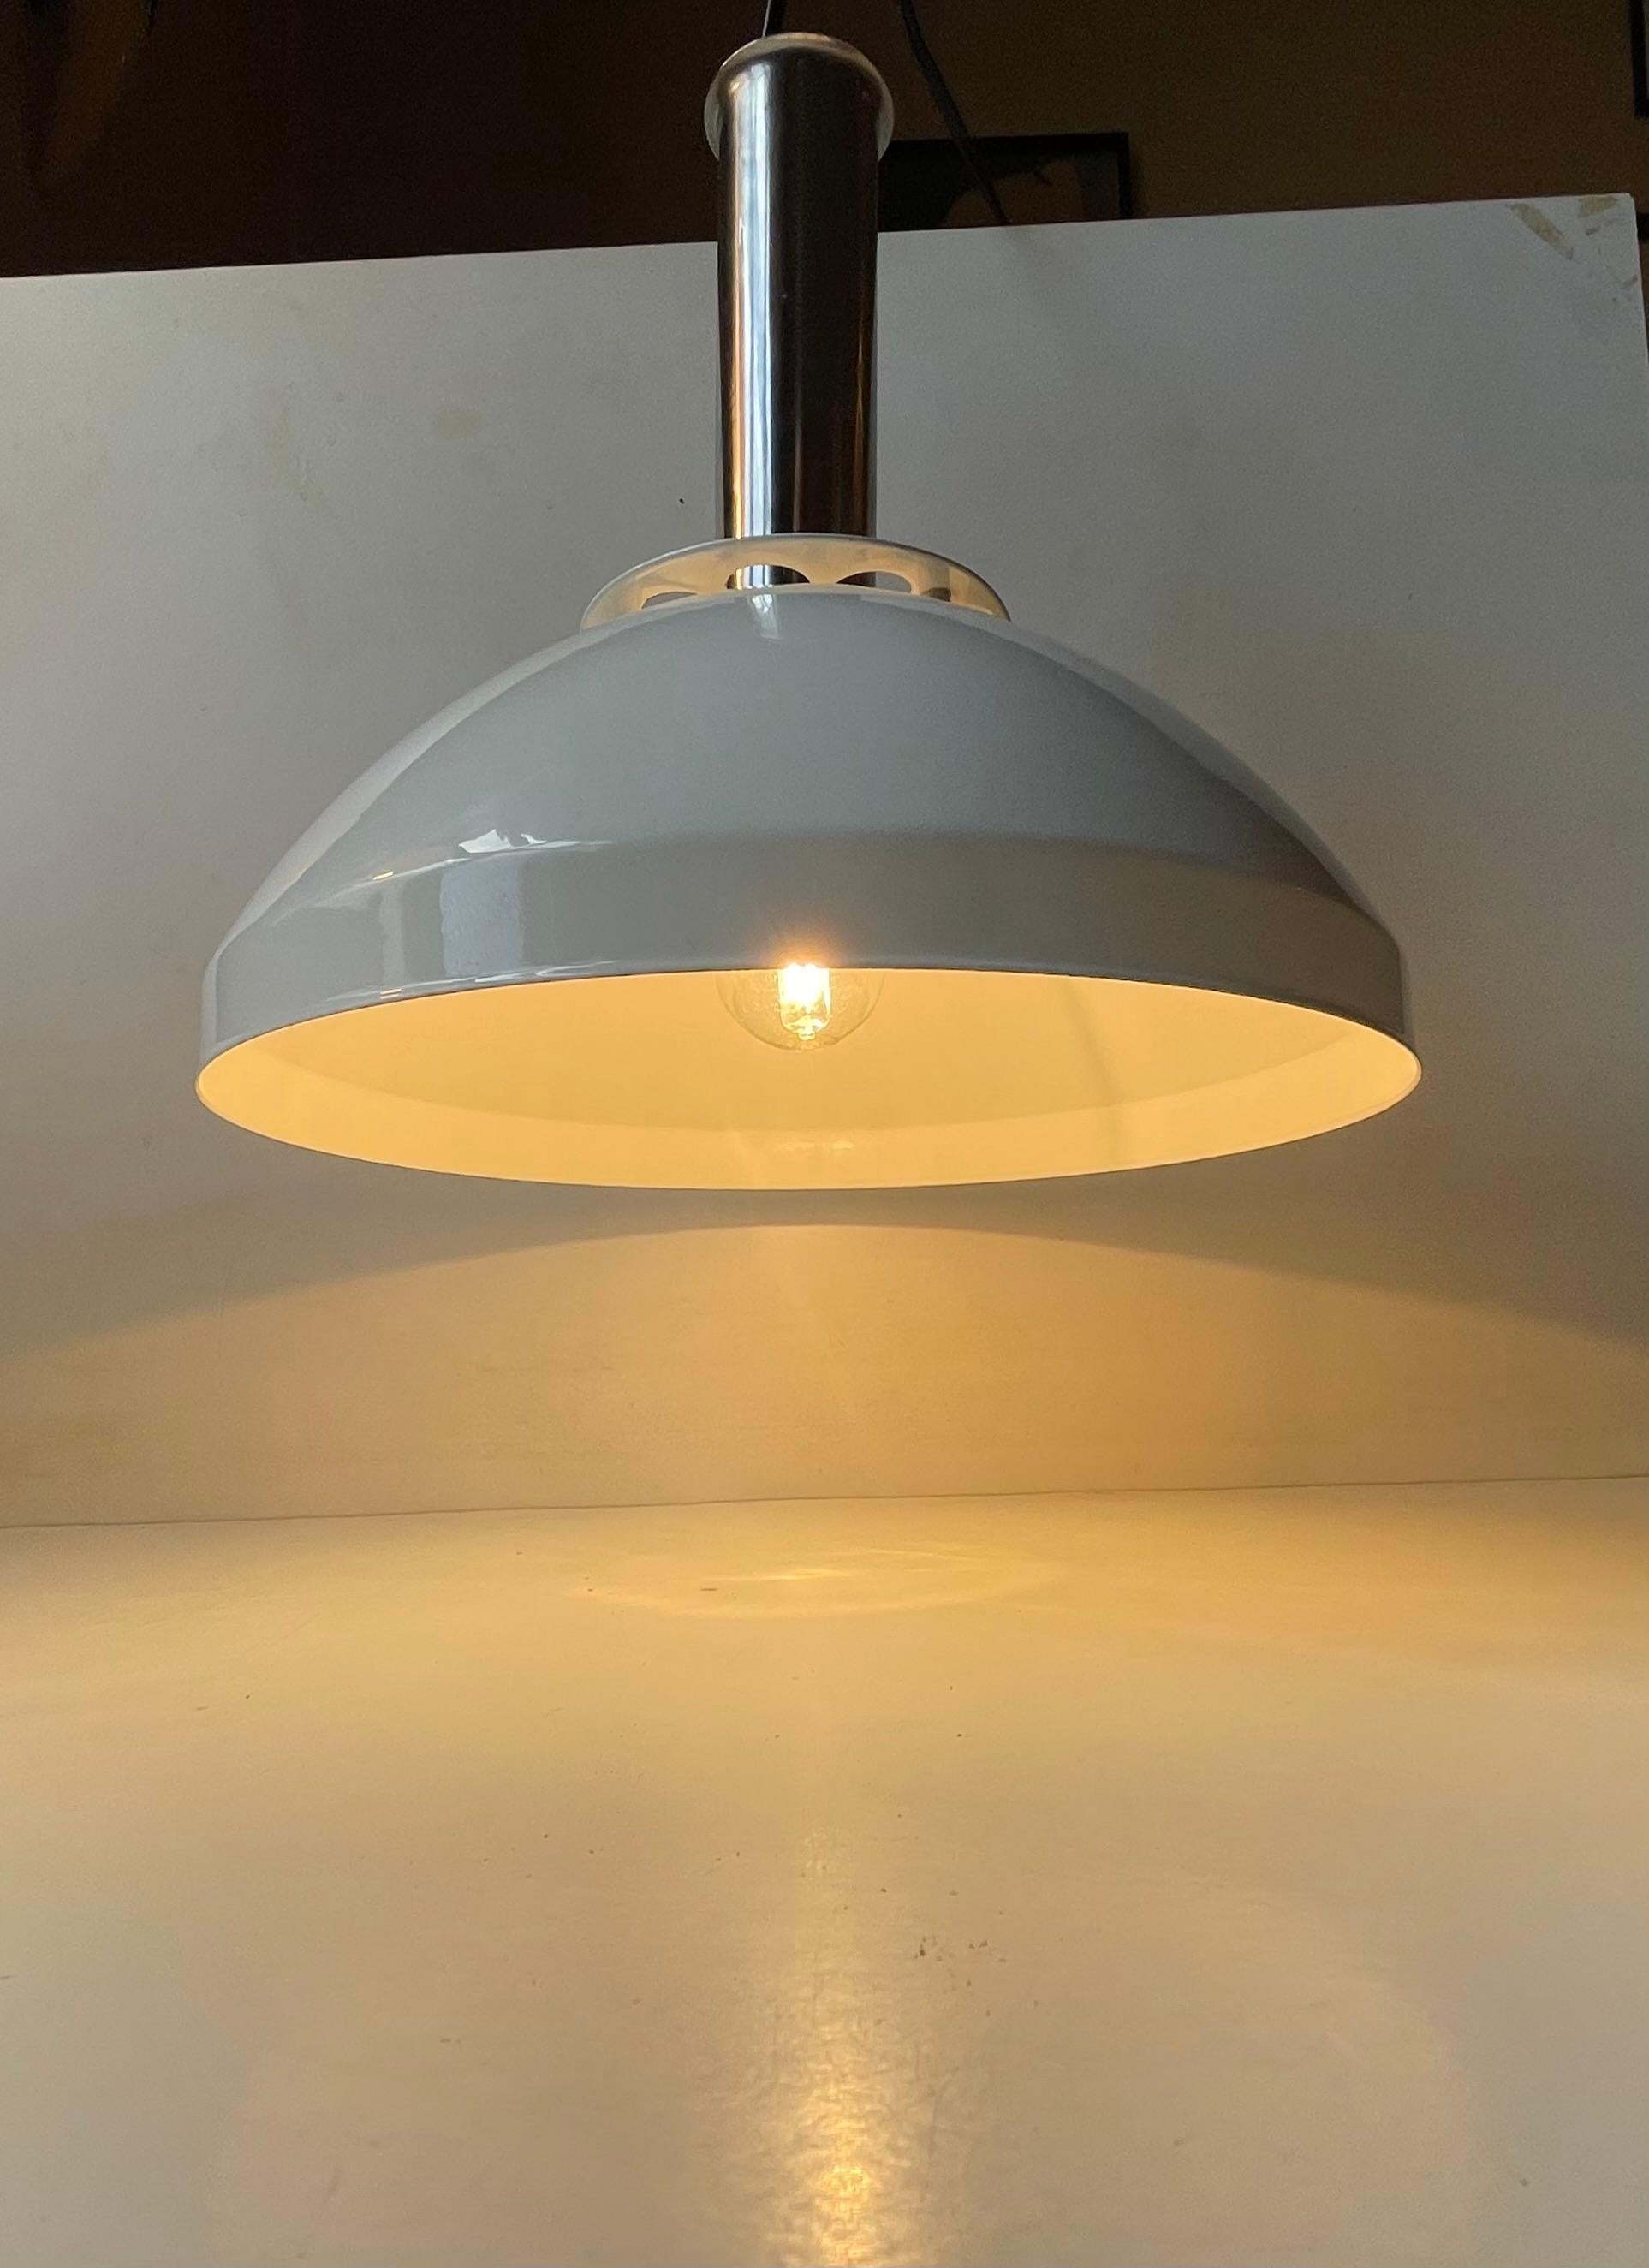 Italian Industrial Ceiling Lamp in White Enamel and Chrome Plating, 1970s In Good Condition For Sale In Esbjerg, DK